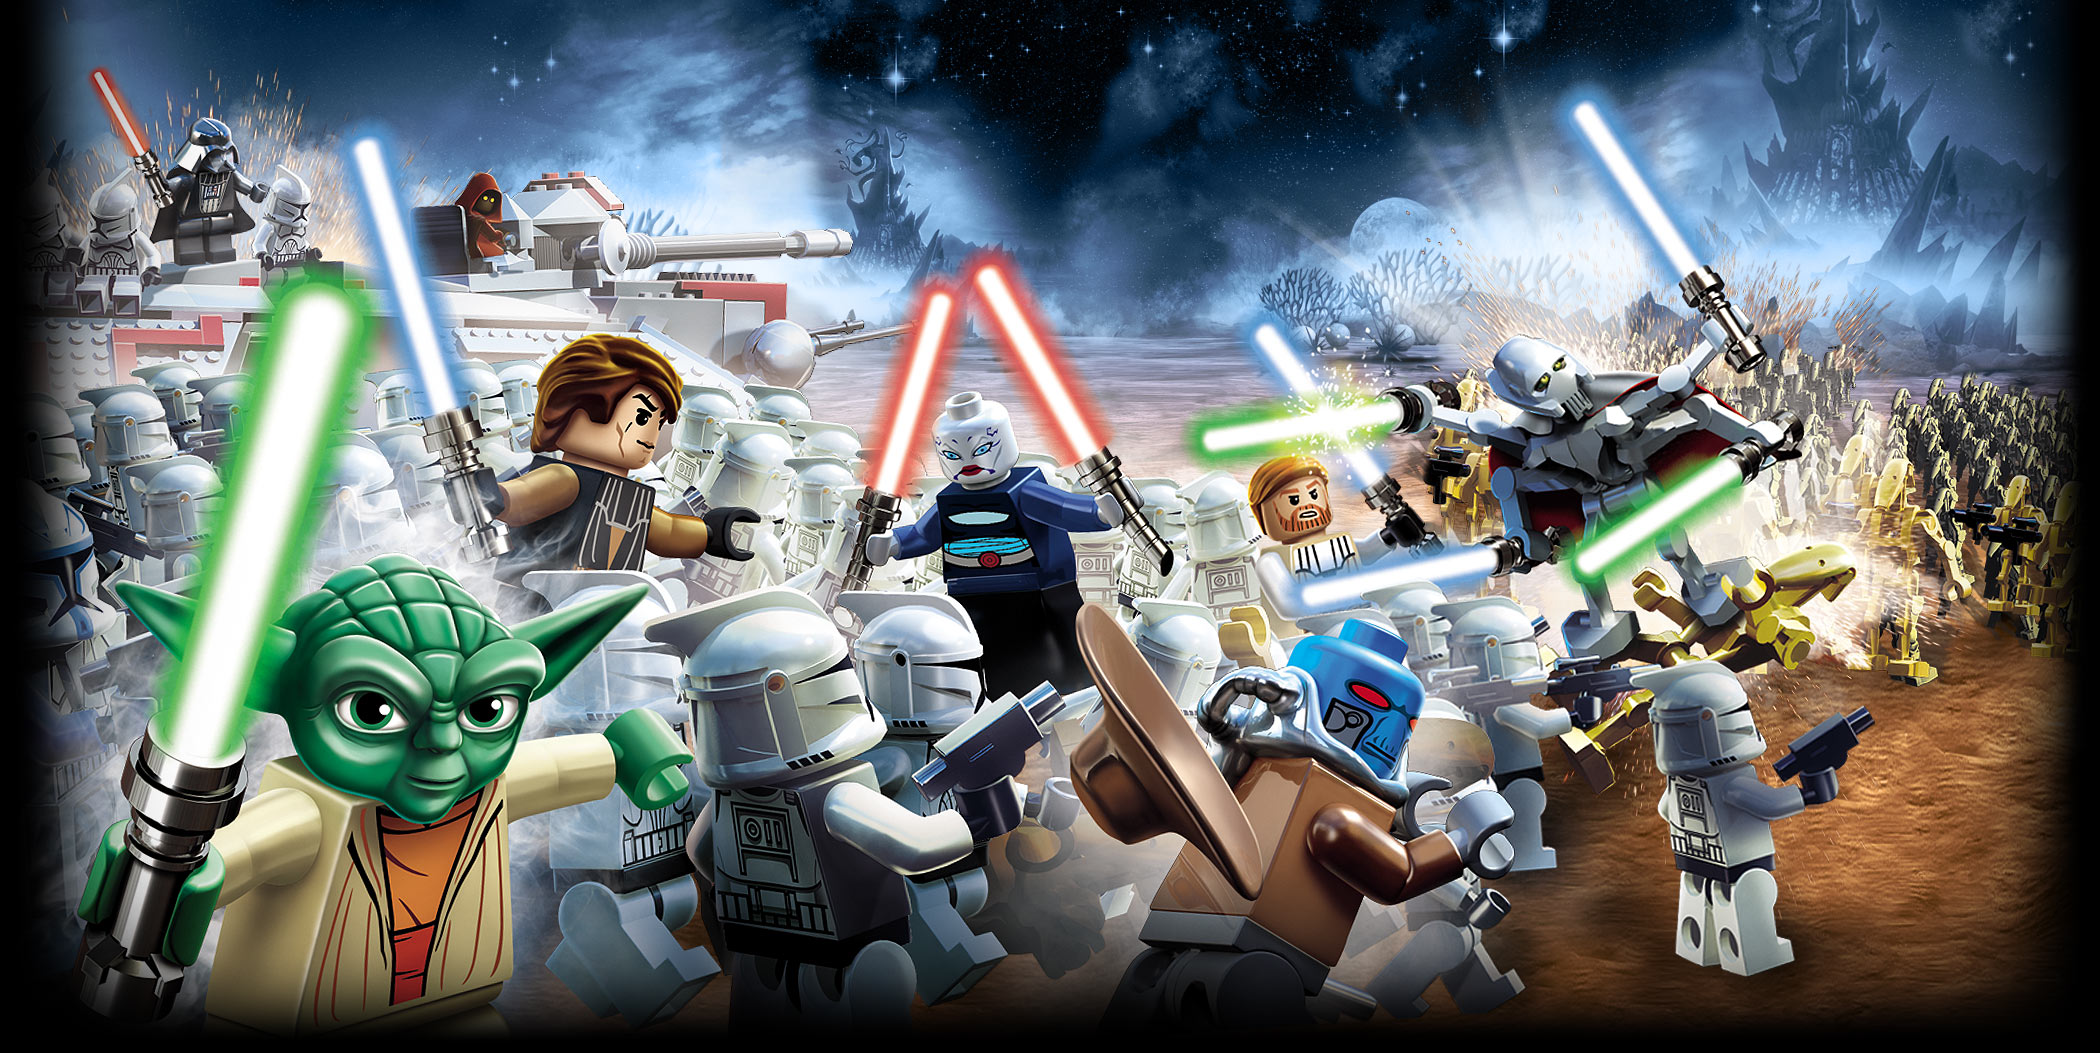 LEGO Star Wars III: The Clone Wars for Mac - Features | Feral Interactive